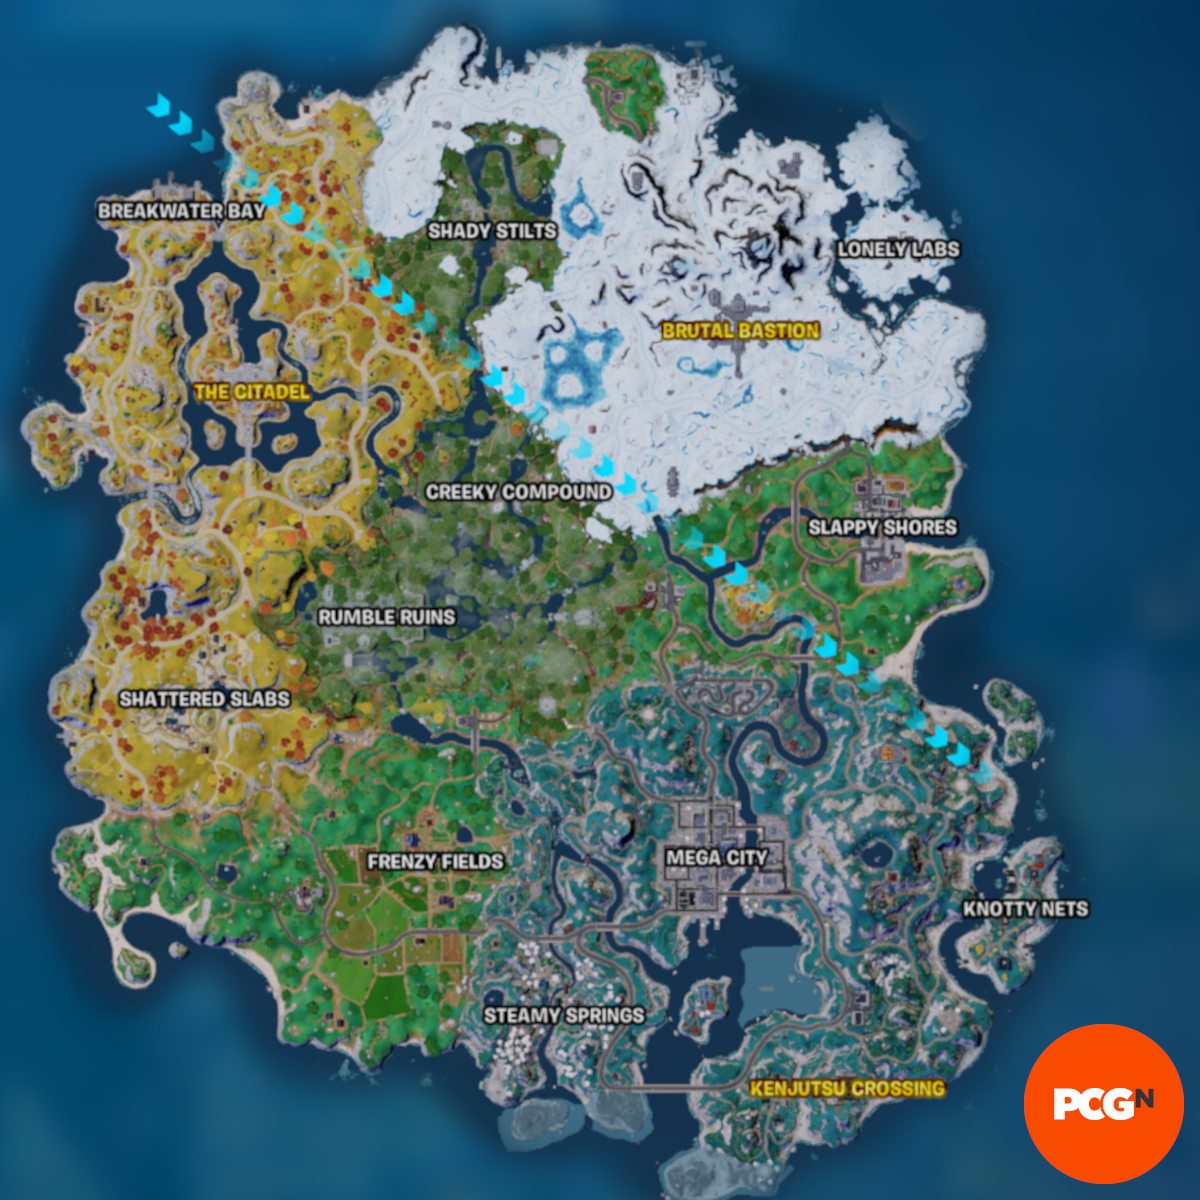 Chapter 4 Fortnite Map Fortnite Chapter 4 Season 3 map and how to find hot spots - Nation Online